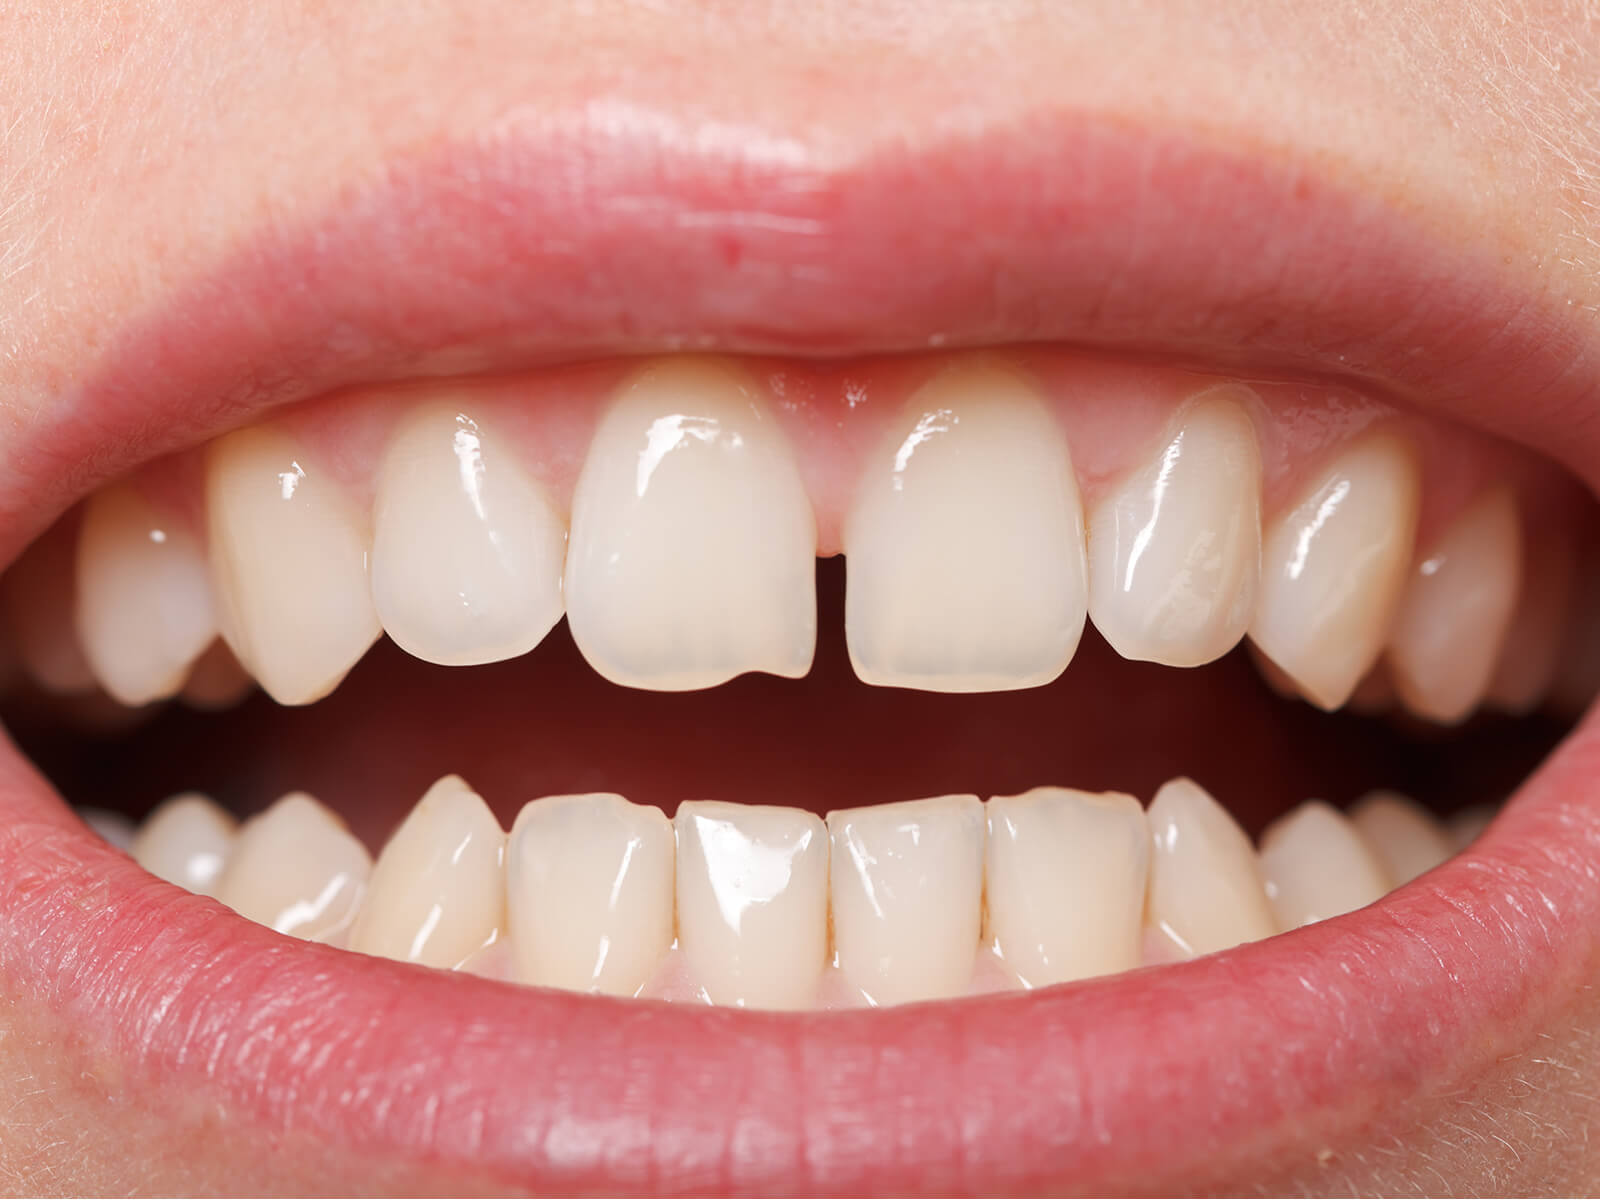 5 Options to Fill Your Tooth Gap for a Confident Smile